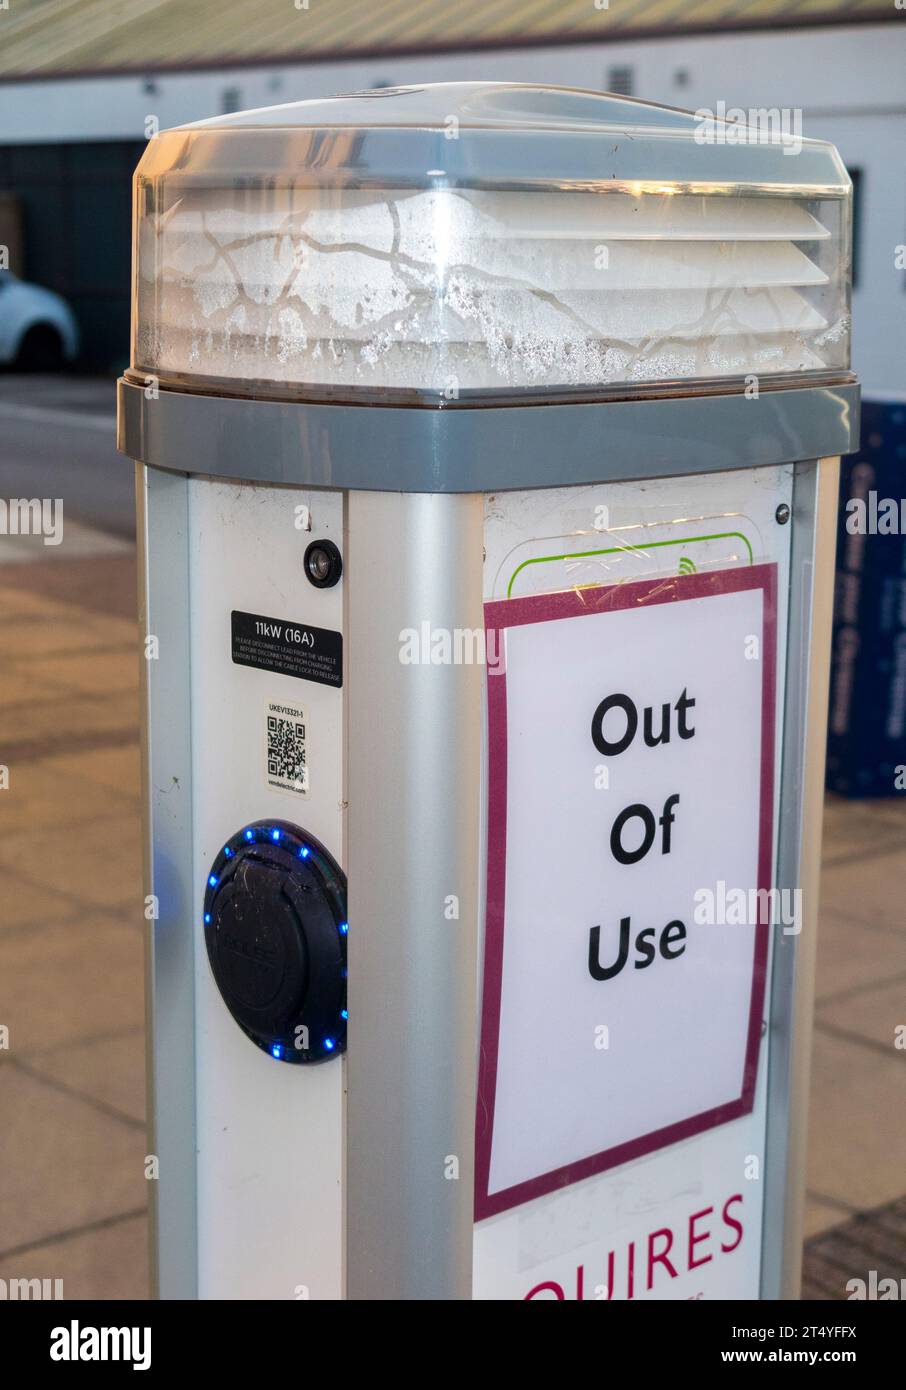 Electric vehicle / ev car charging point described as out of use, so presumably out of order or broken / unavailable due to malfunction. UK (136) Stock Photo